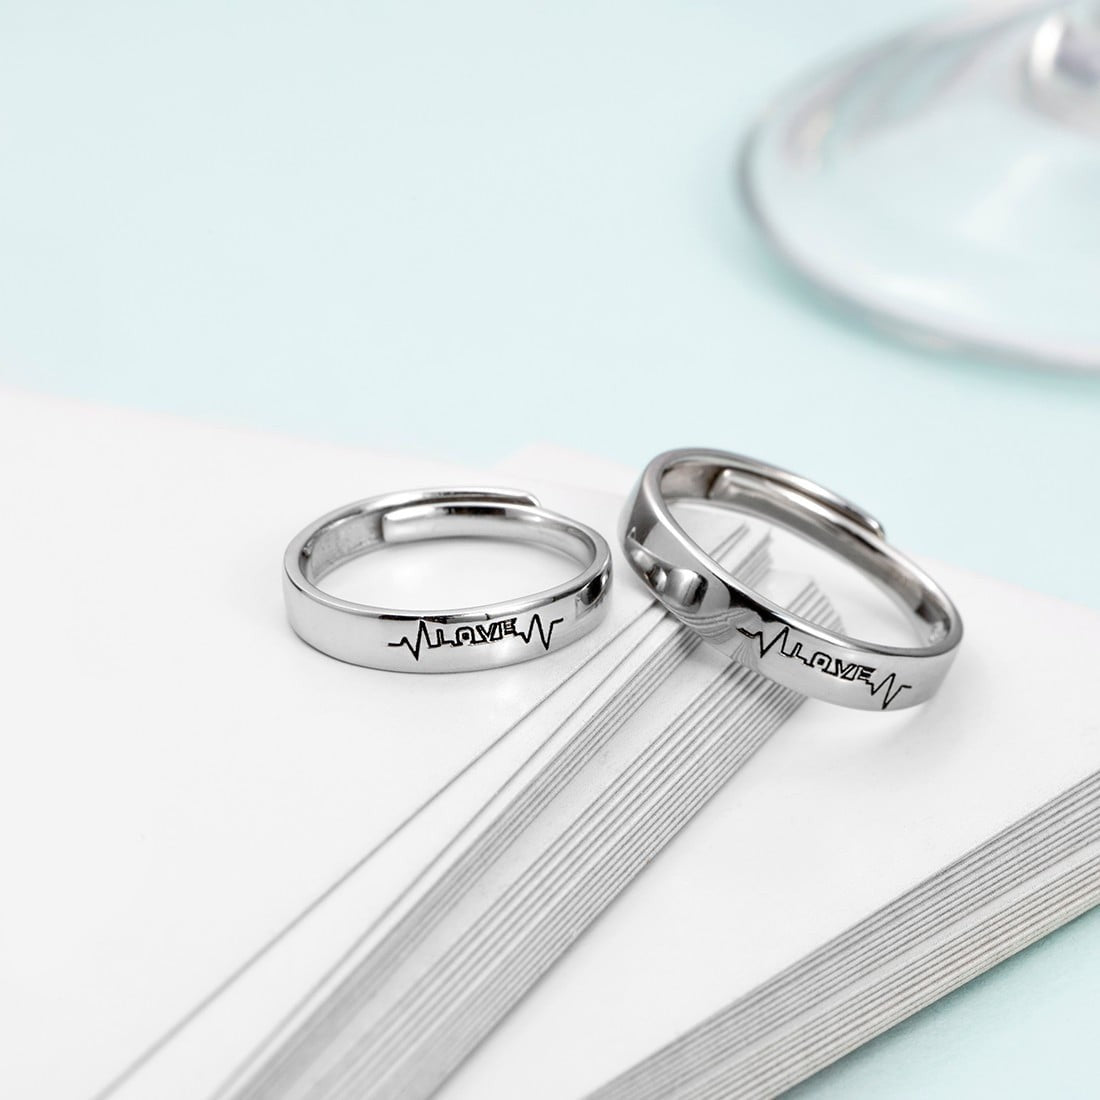 Love Line 925 Sterling Silver Couple Ring Bands (Adjustable)